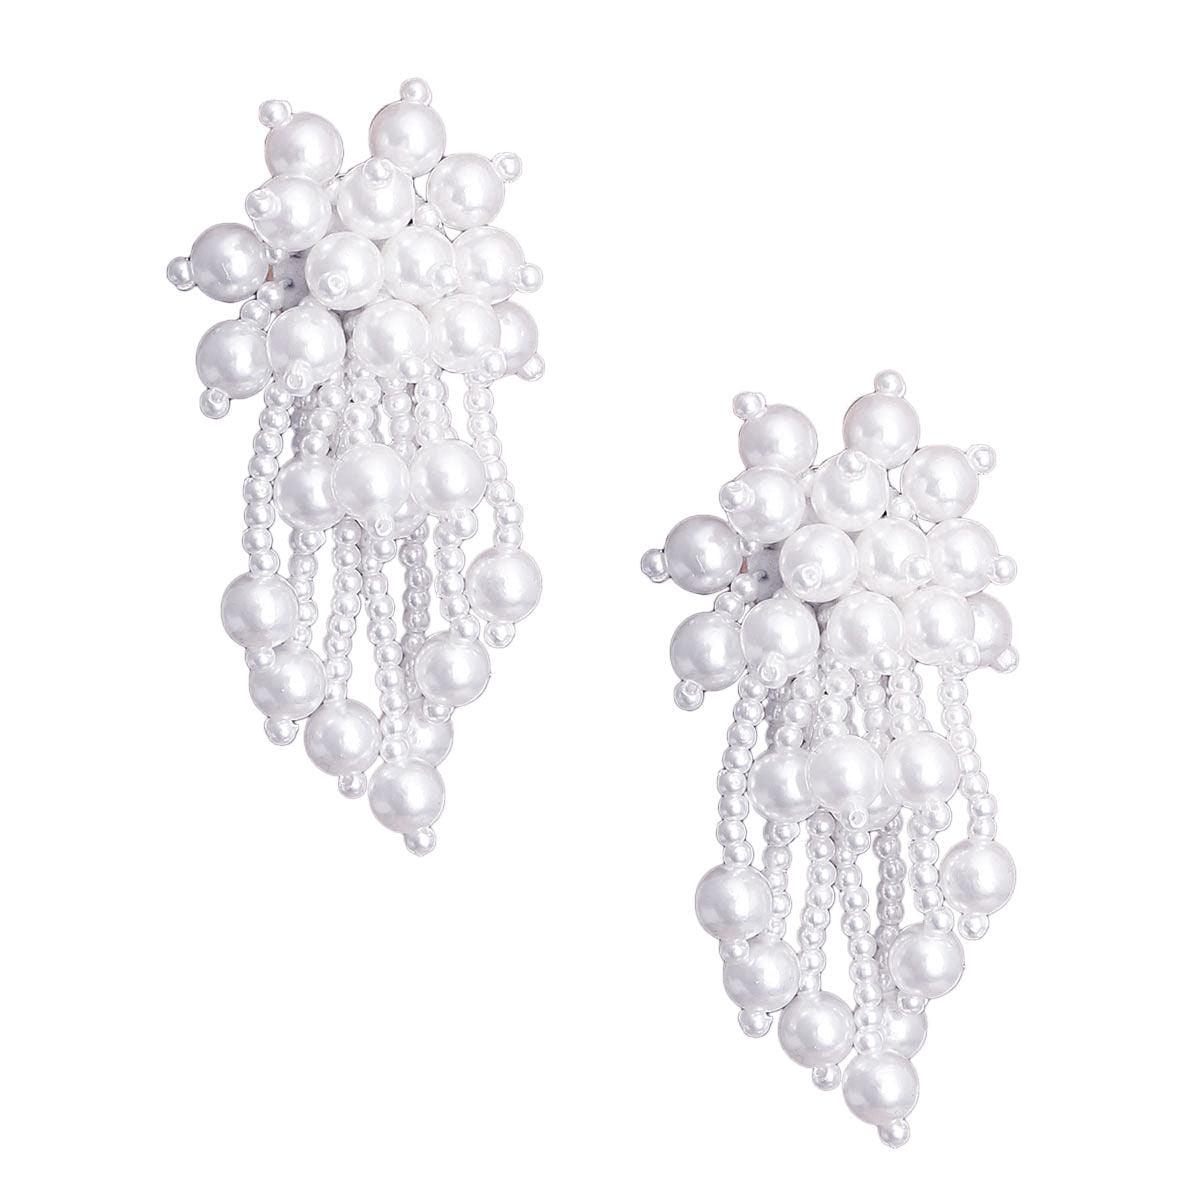 Elegant White Pearl Cluster Drop Earrings - Stand Out in Style & Sophistication